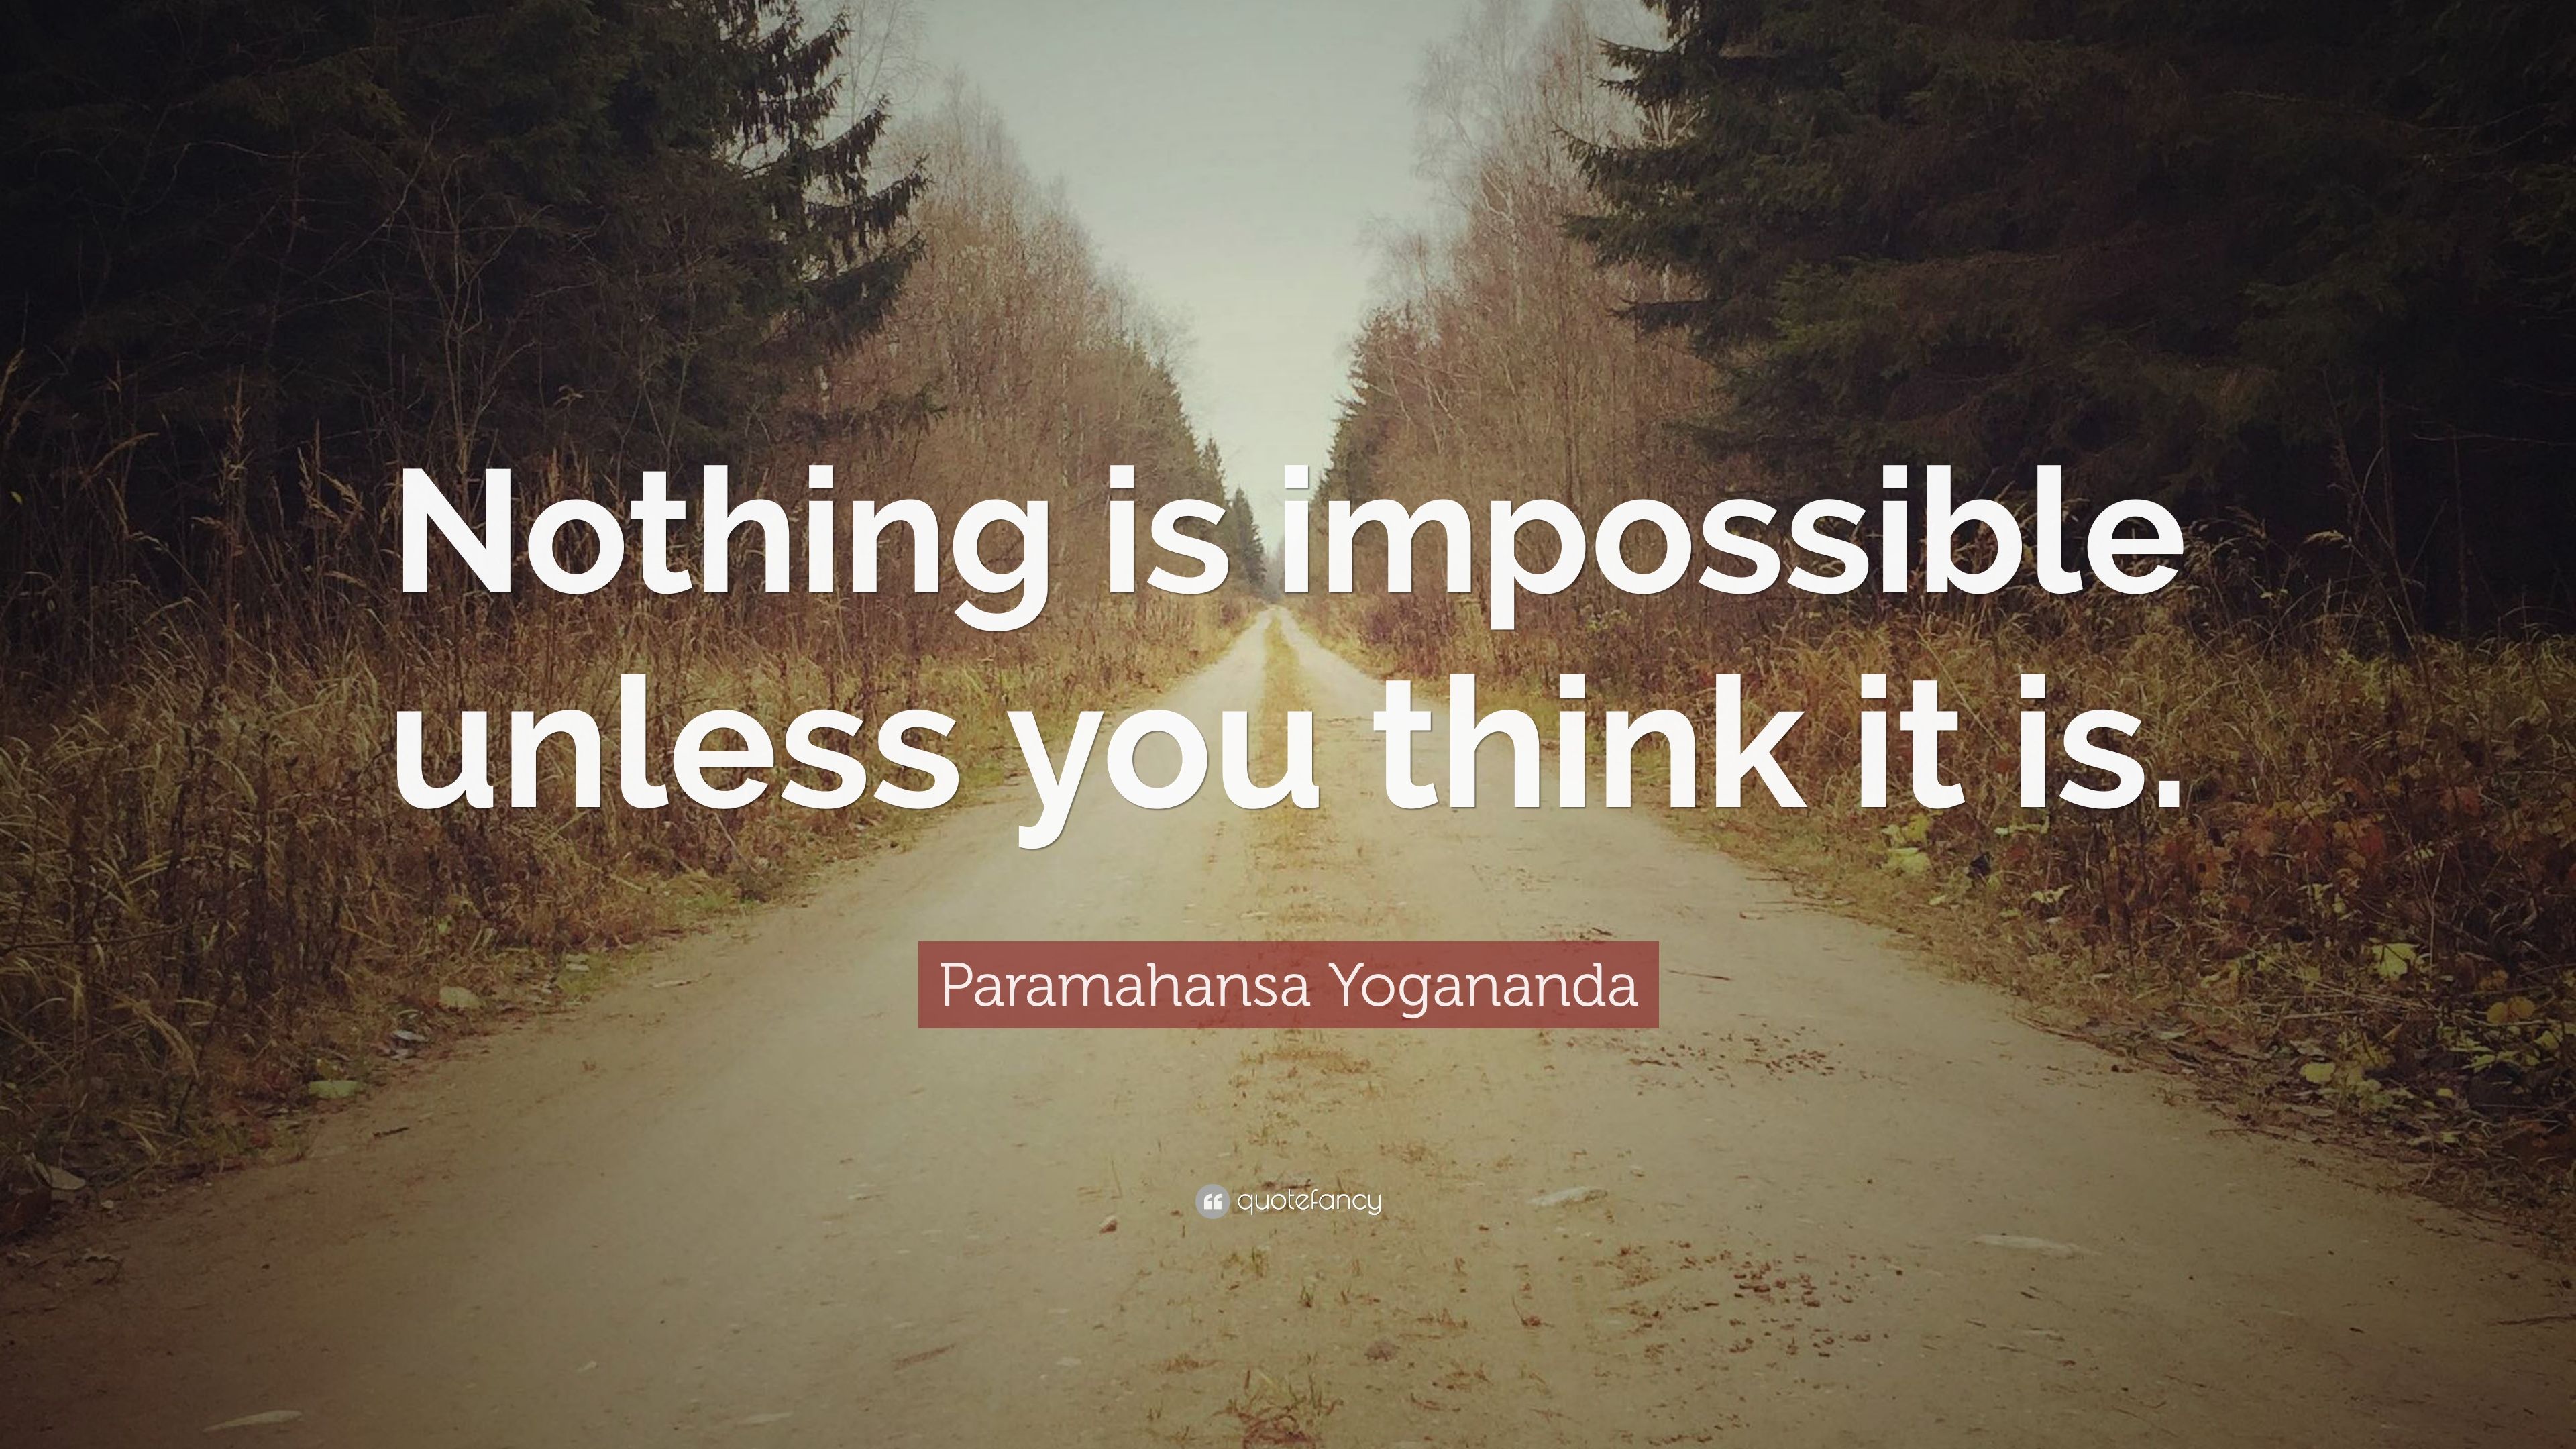 Paramahansa Yogananda Quote: “Nothing is impossible unless you think it is.”